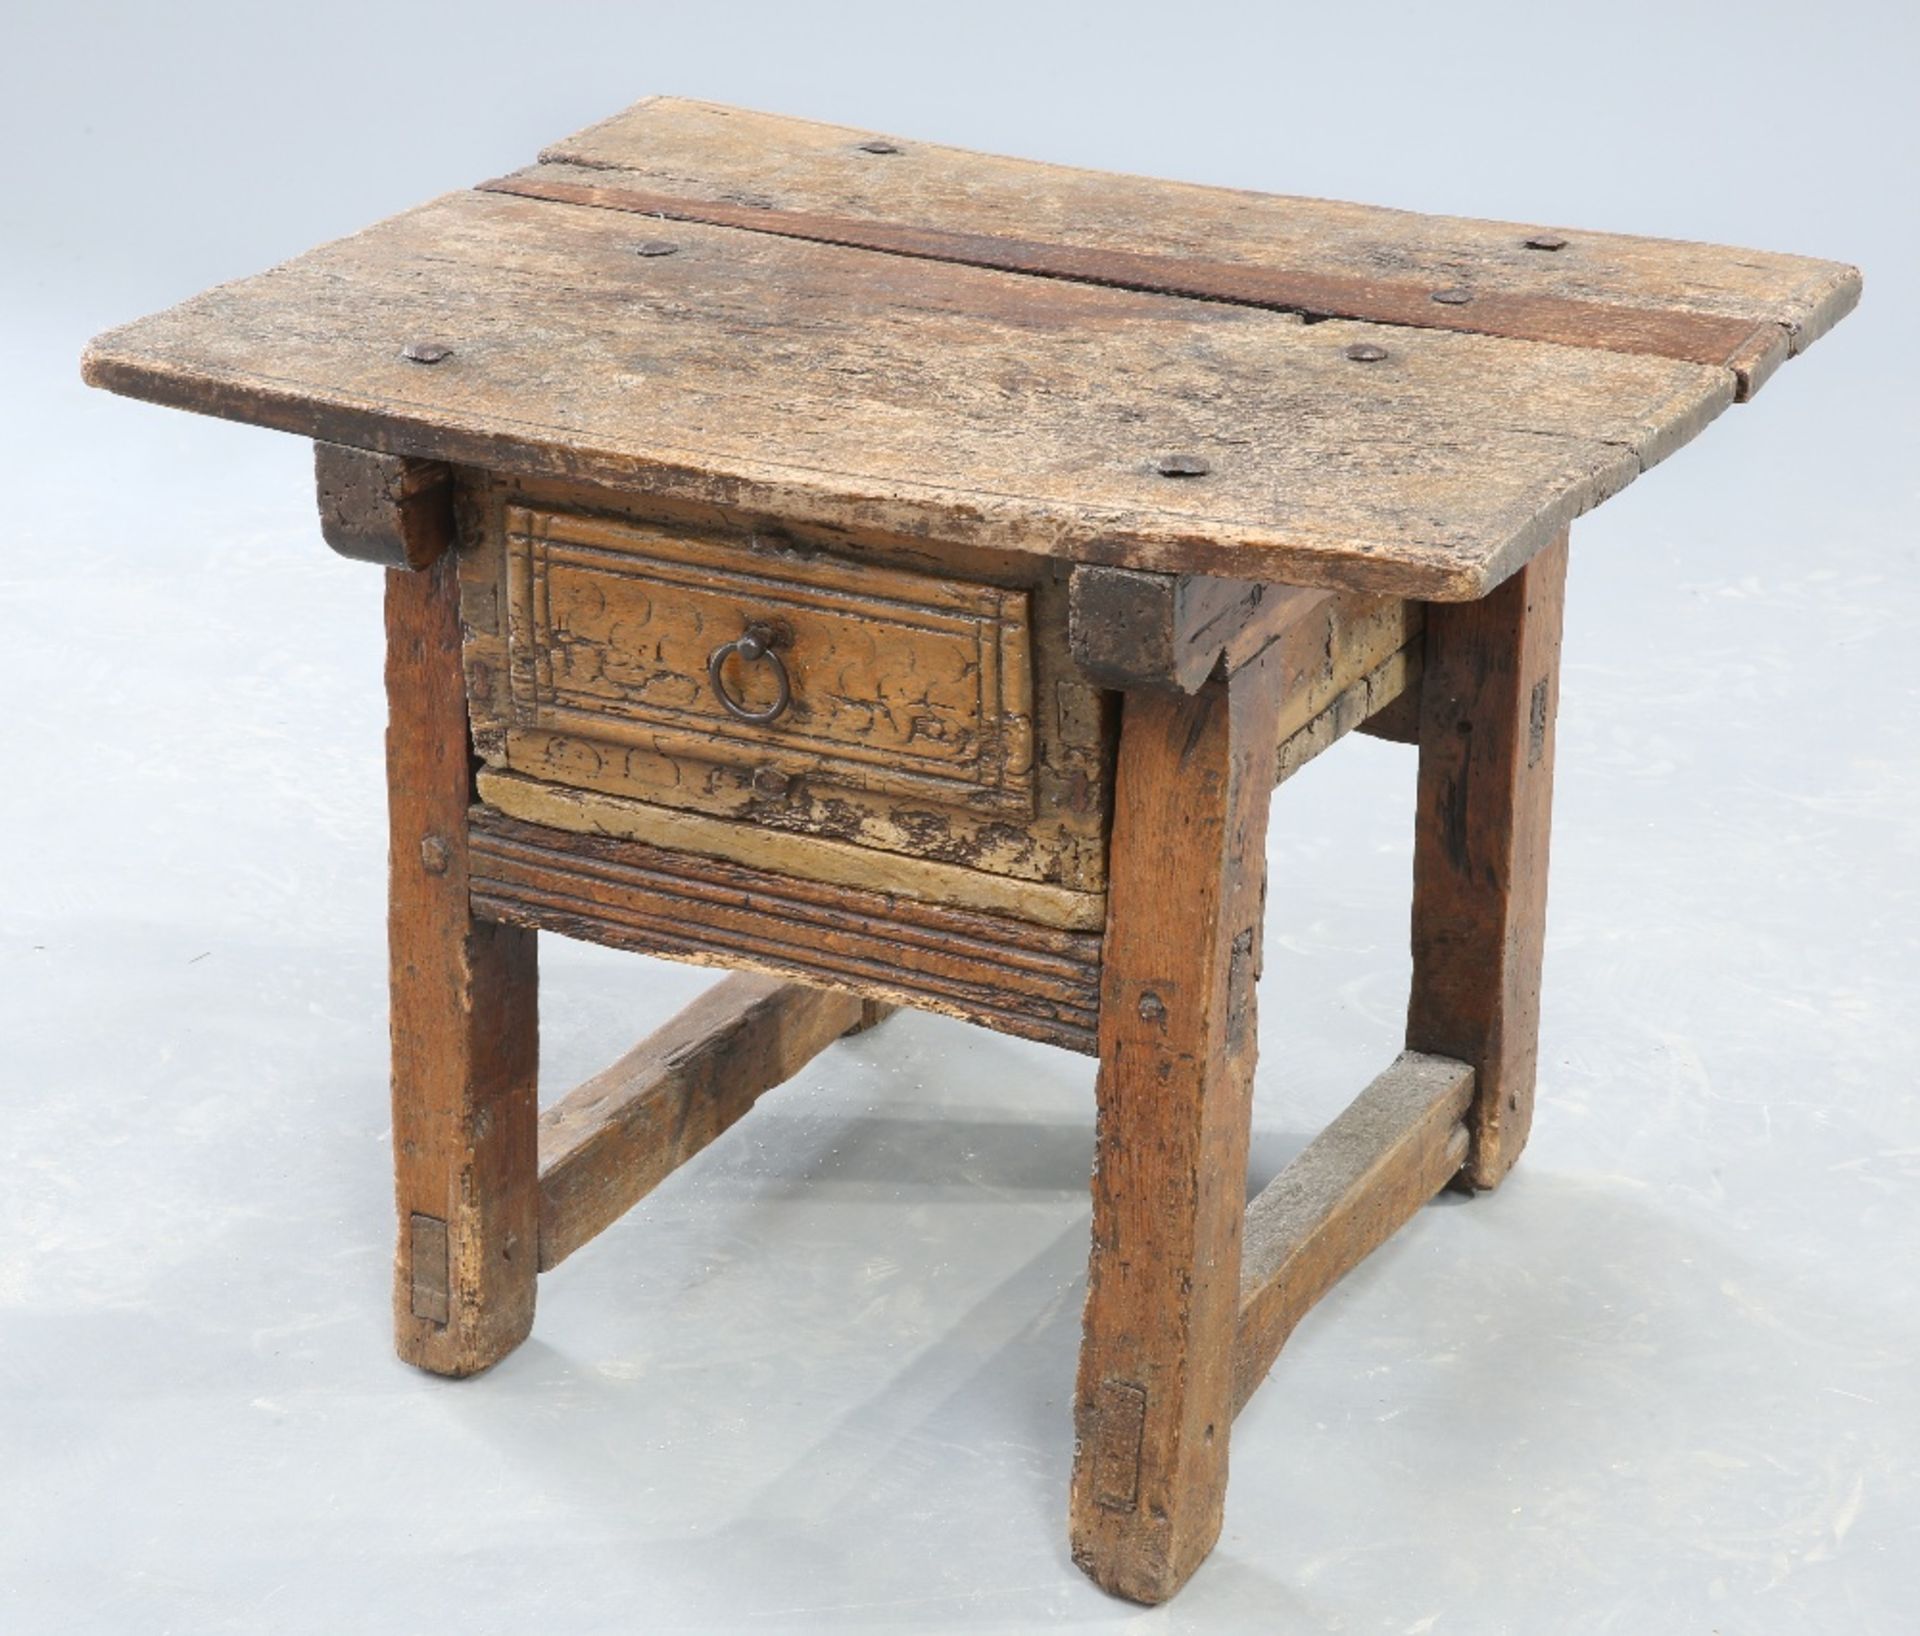 A SPANISH SIDE TABLE, PROBABLY 18TH CENTURY